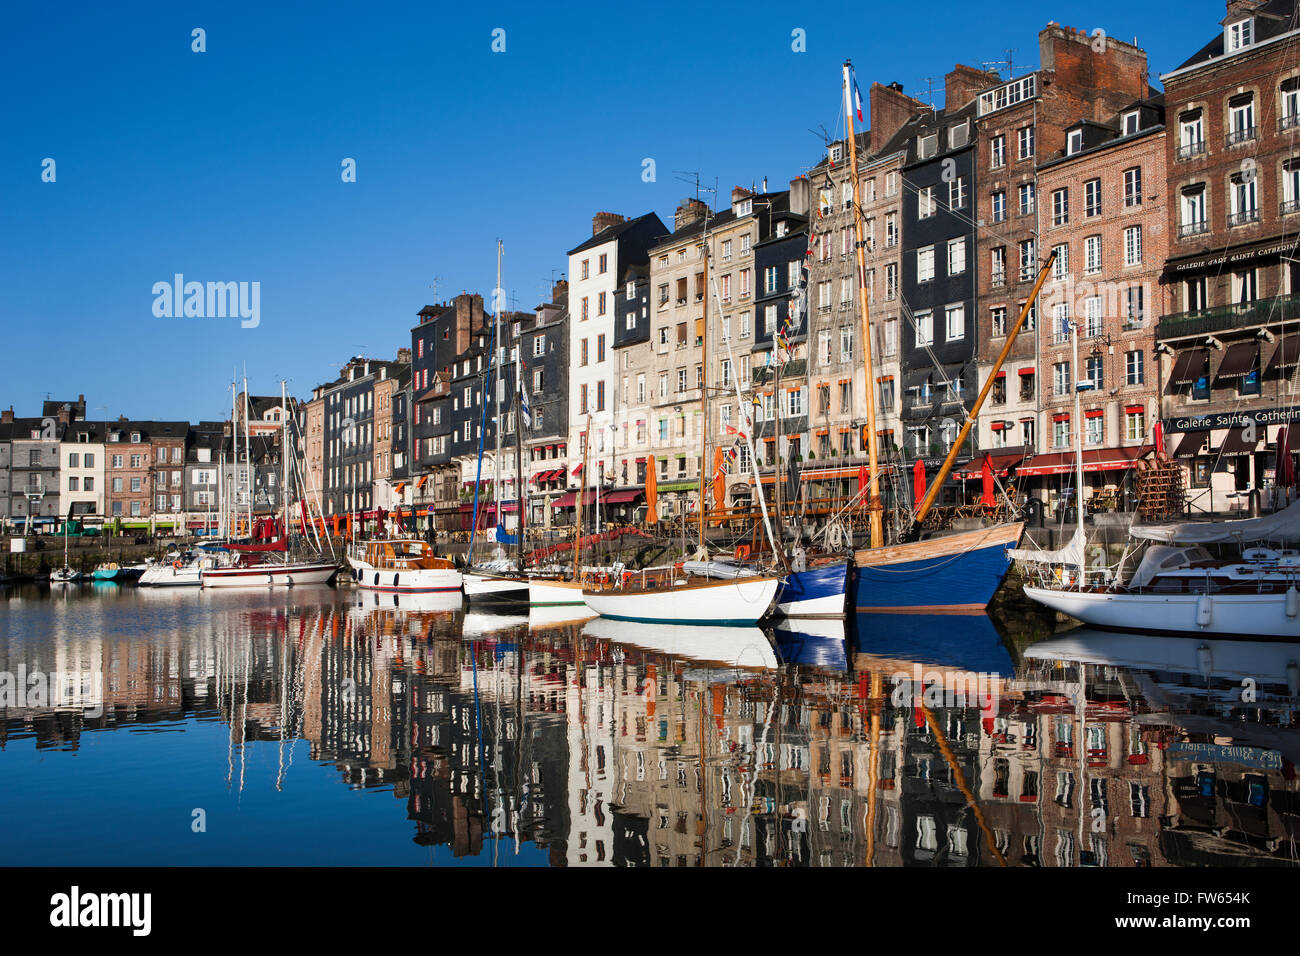 Houses and boats at the old harbor with reflections in calm water, Vieux Bassin, Honfleur, Calvados, Normandy, France Stock Photo